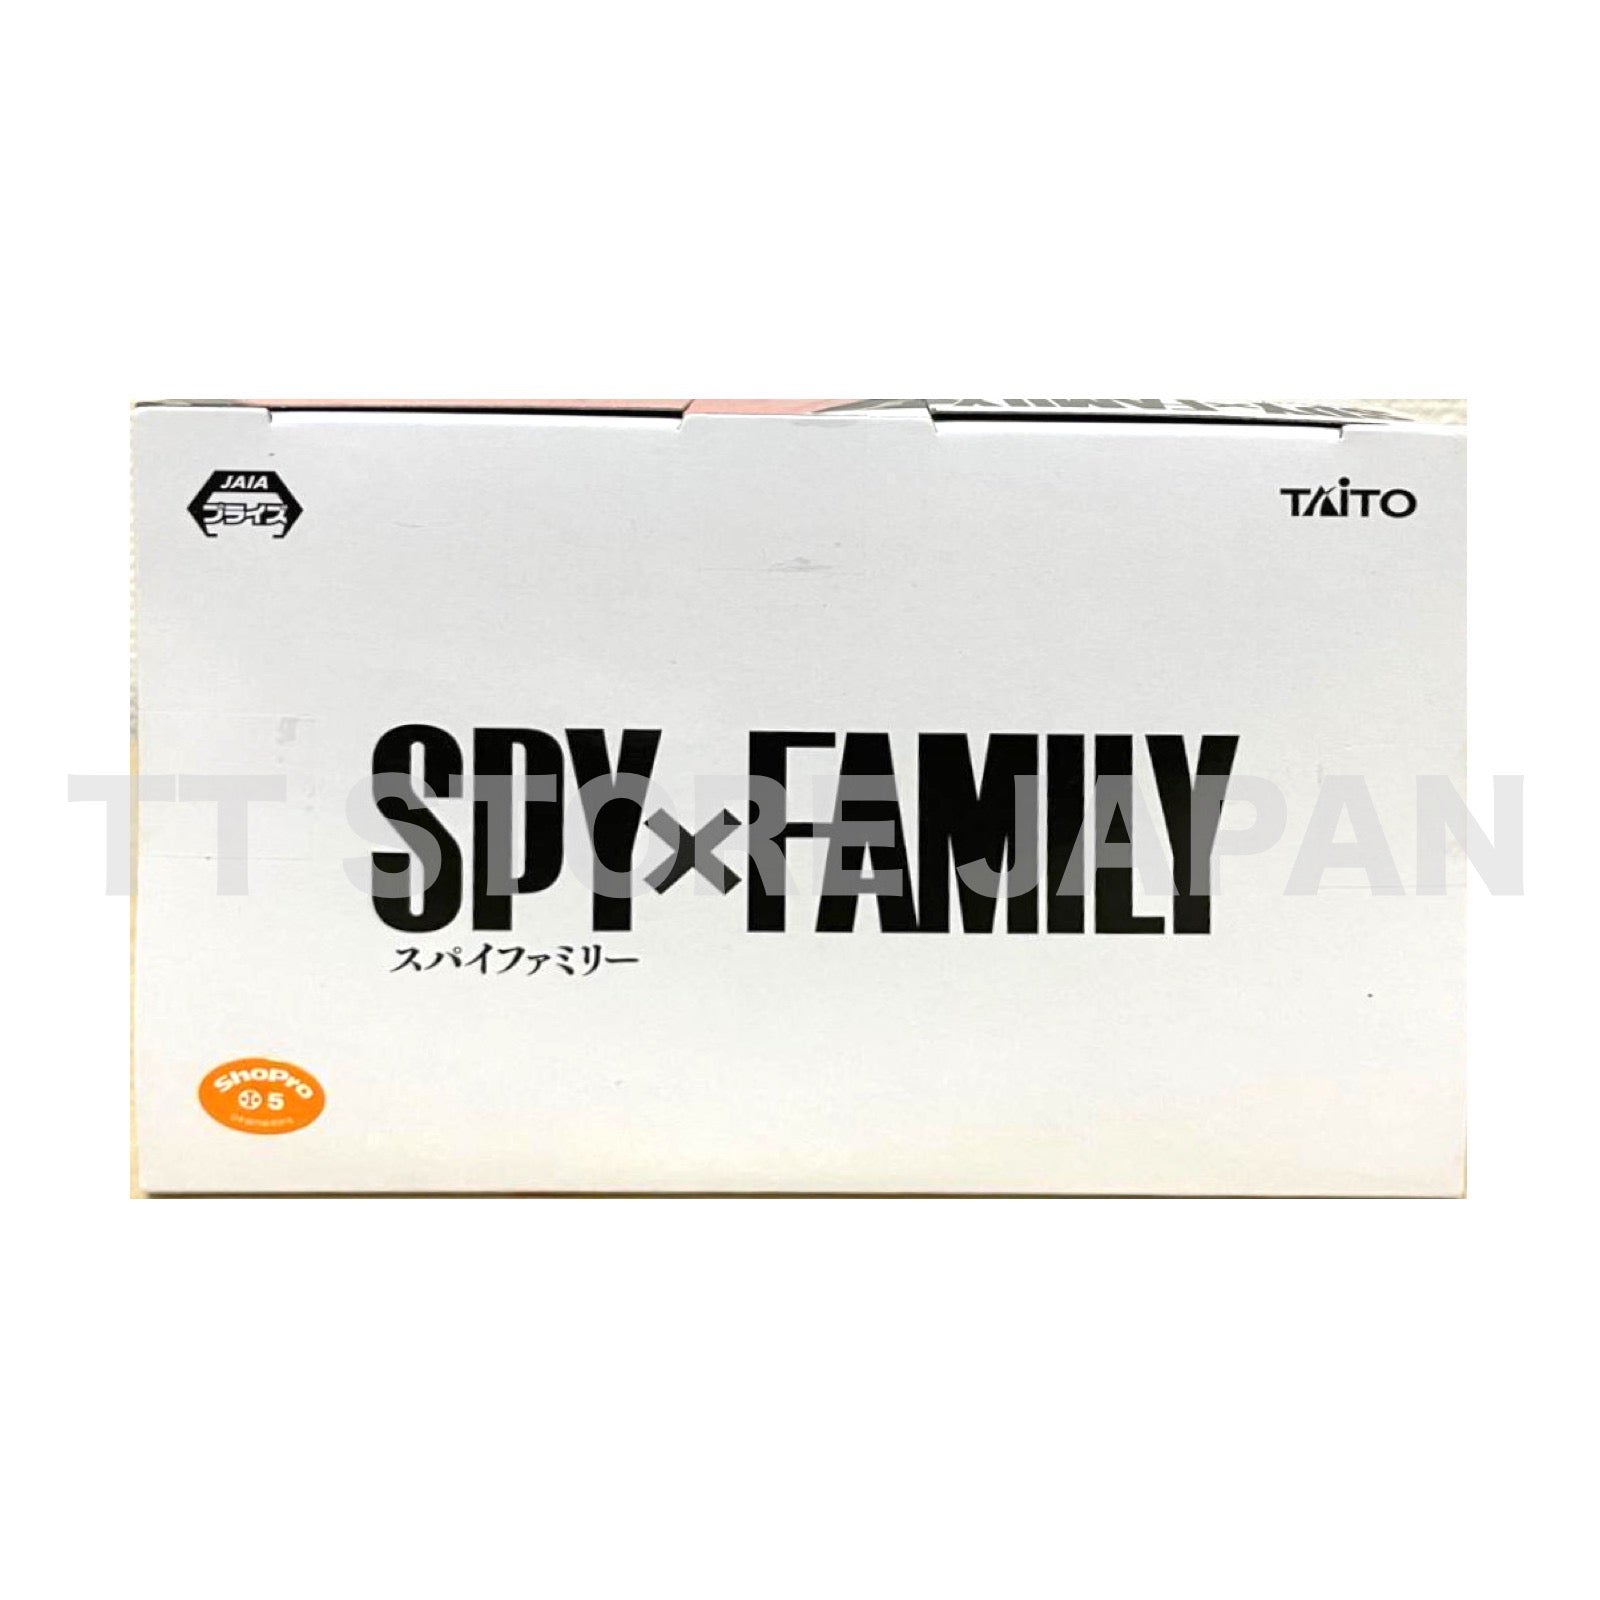 Spy x Family - Statuette Puchieete Anya Forger Renewal Edition